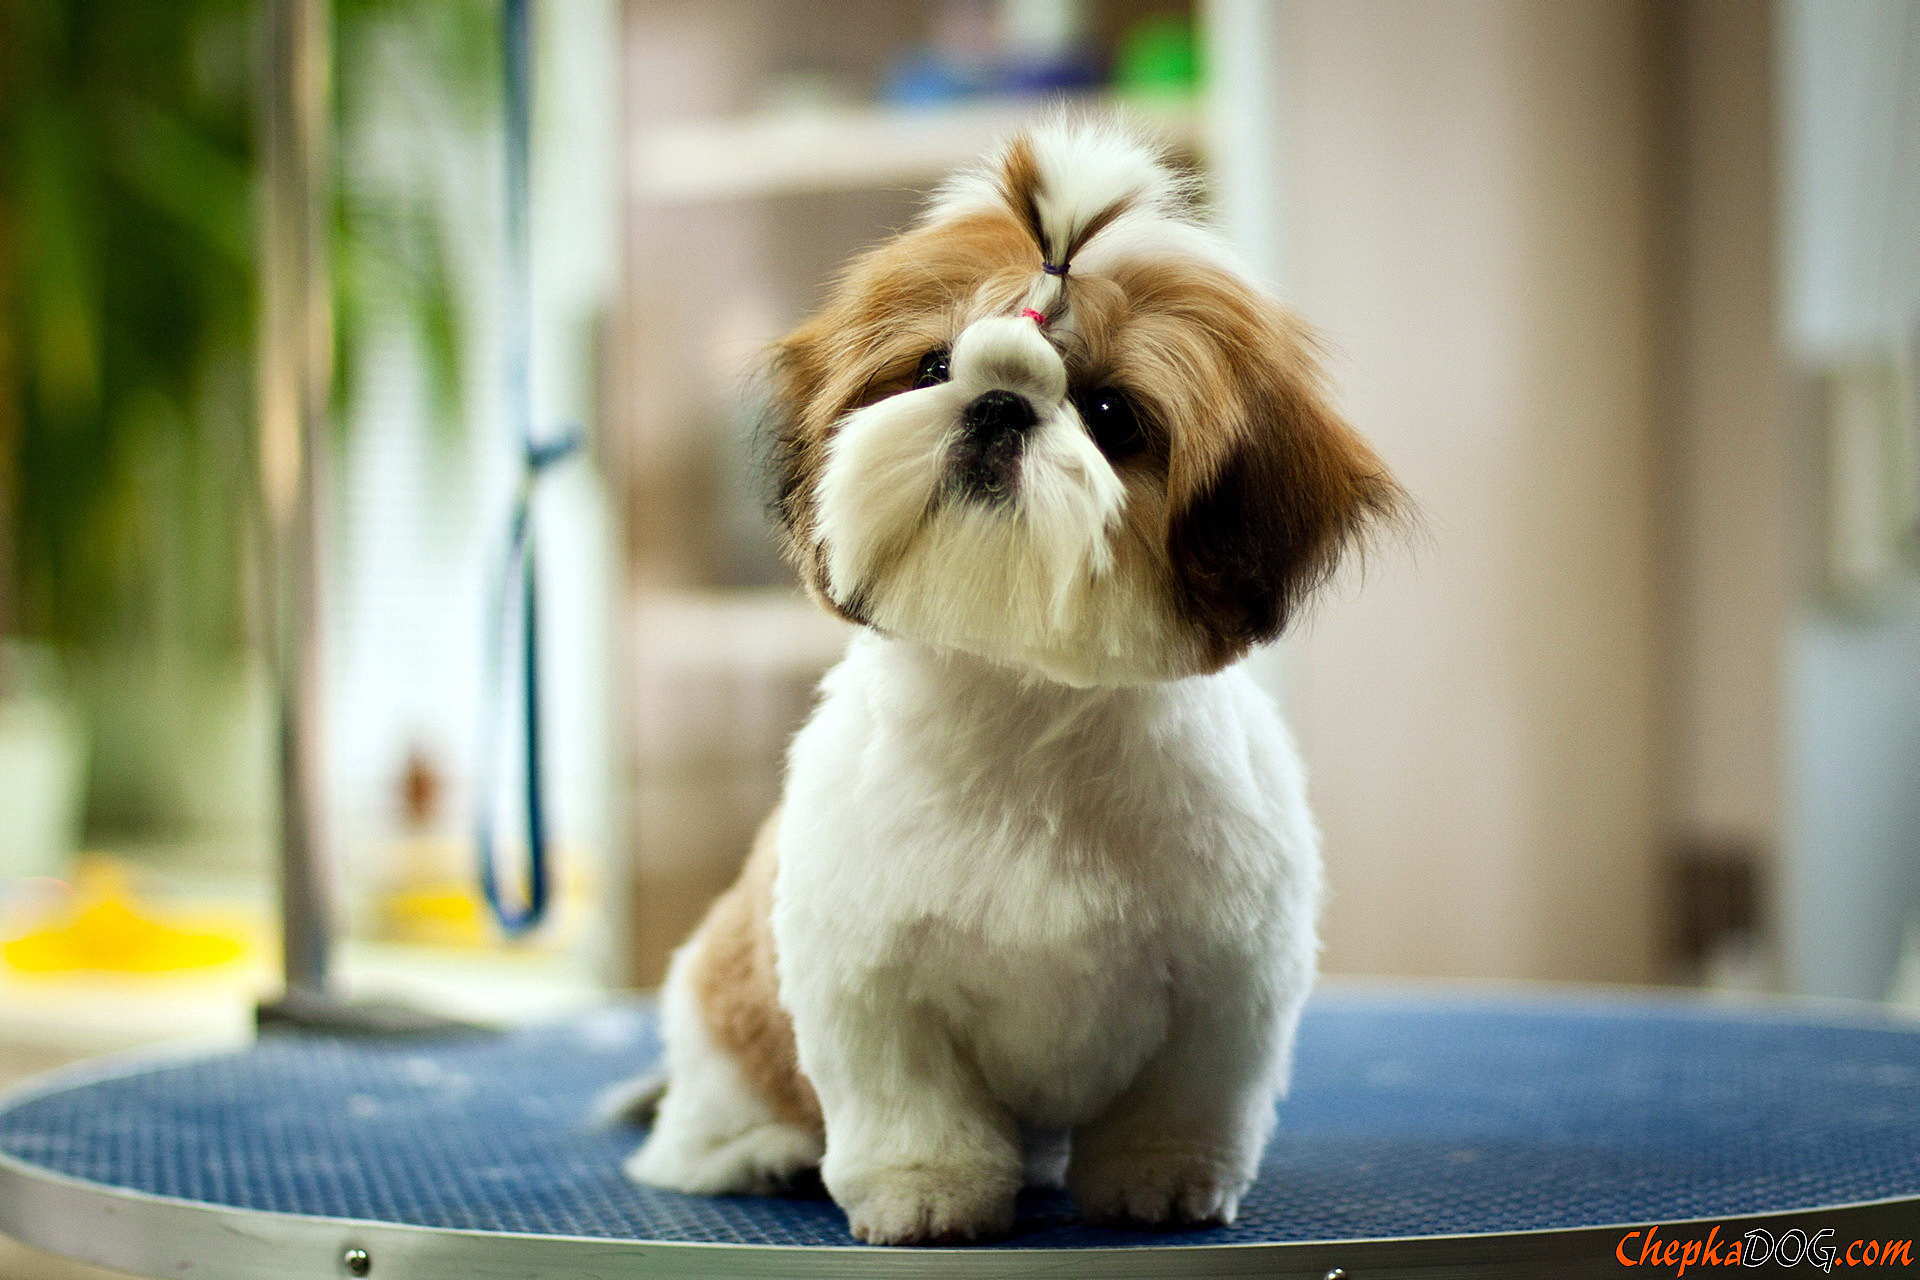 Short Haired Shih Tzu Wallpaper And Image, Picture